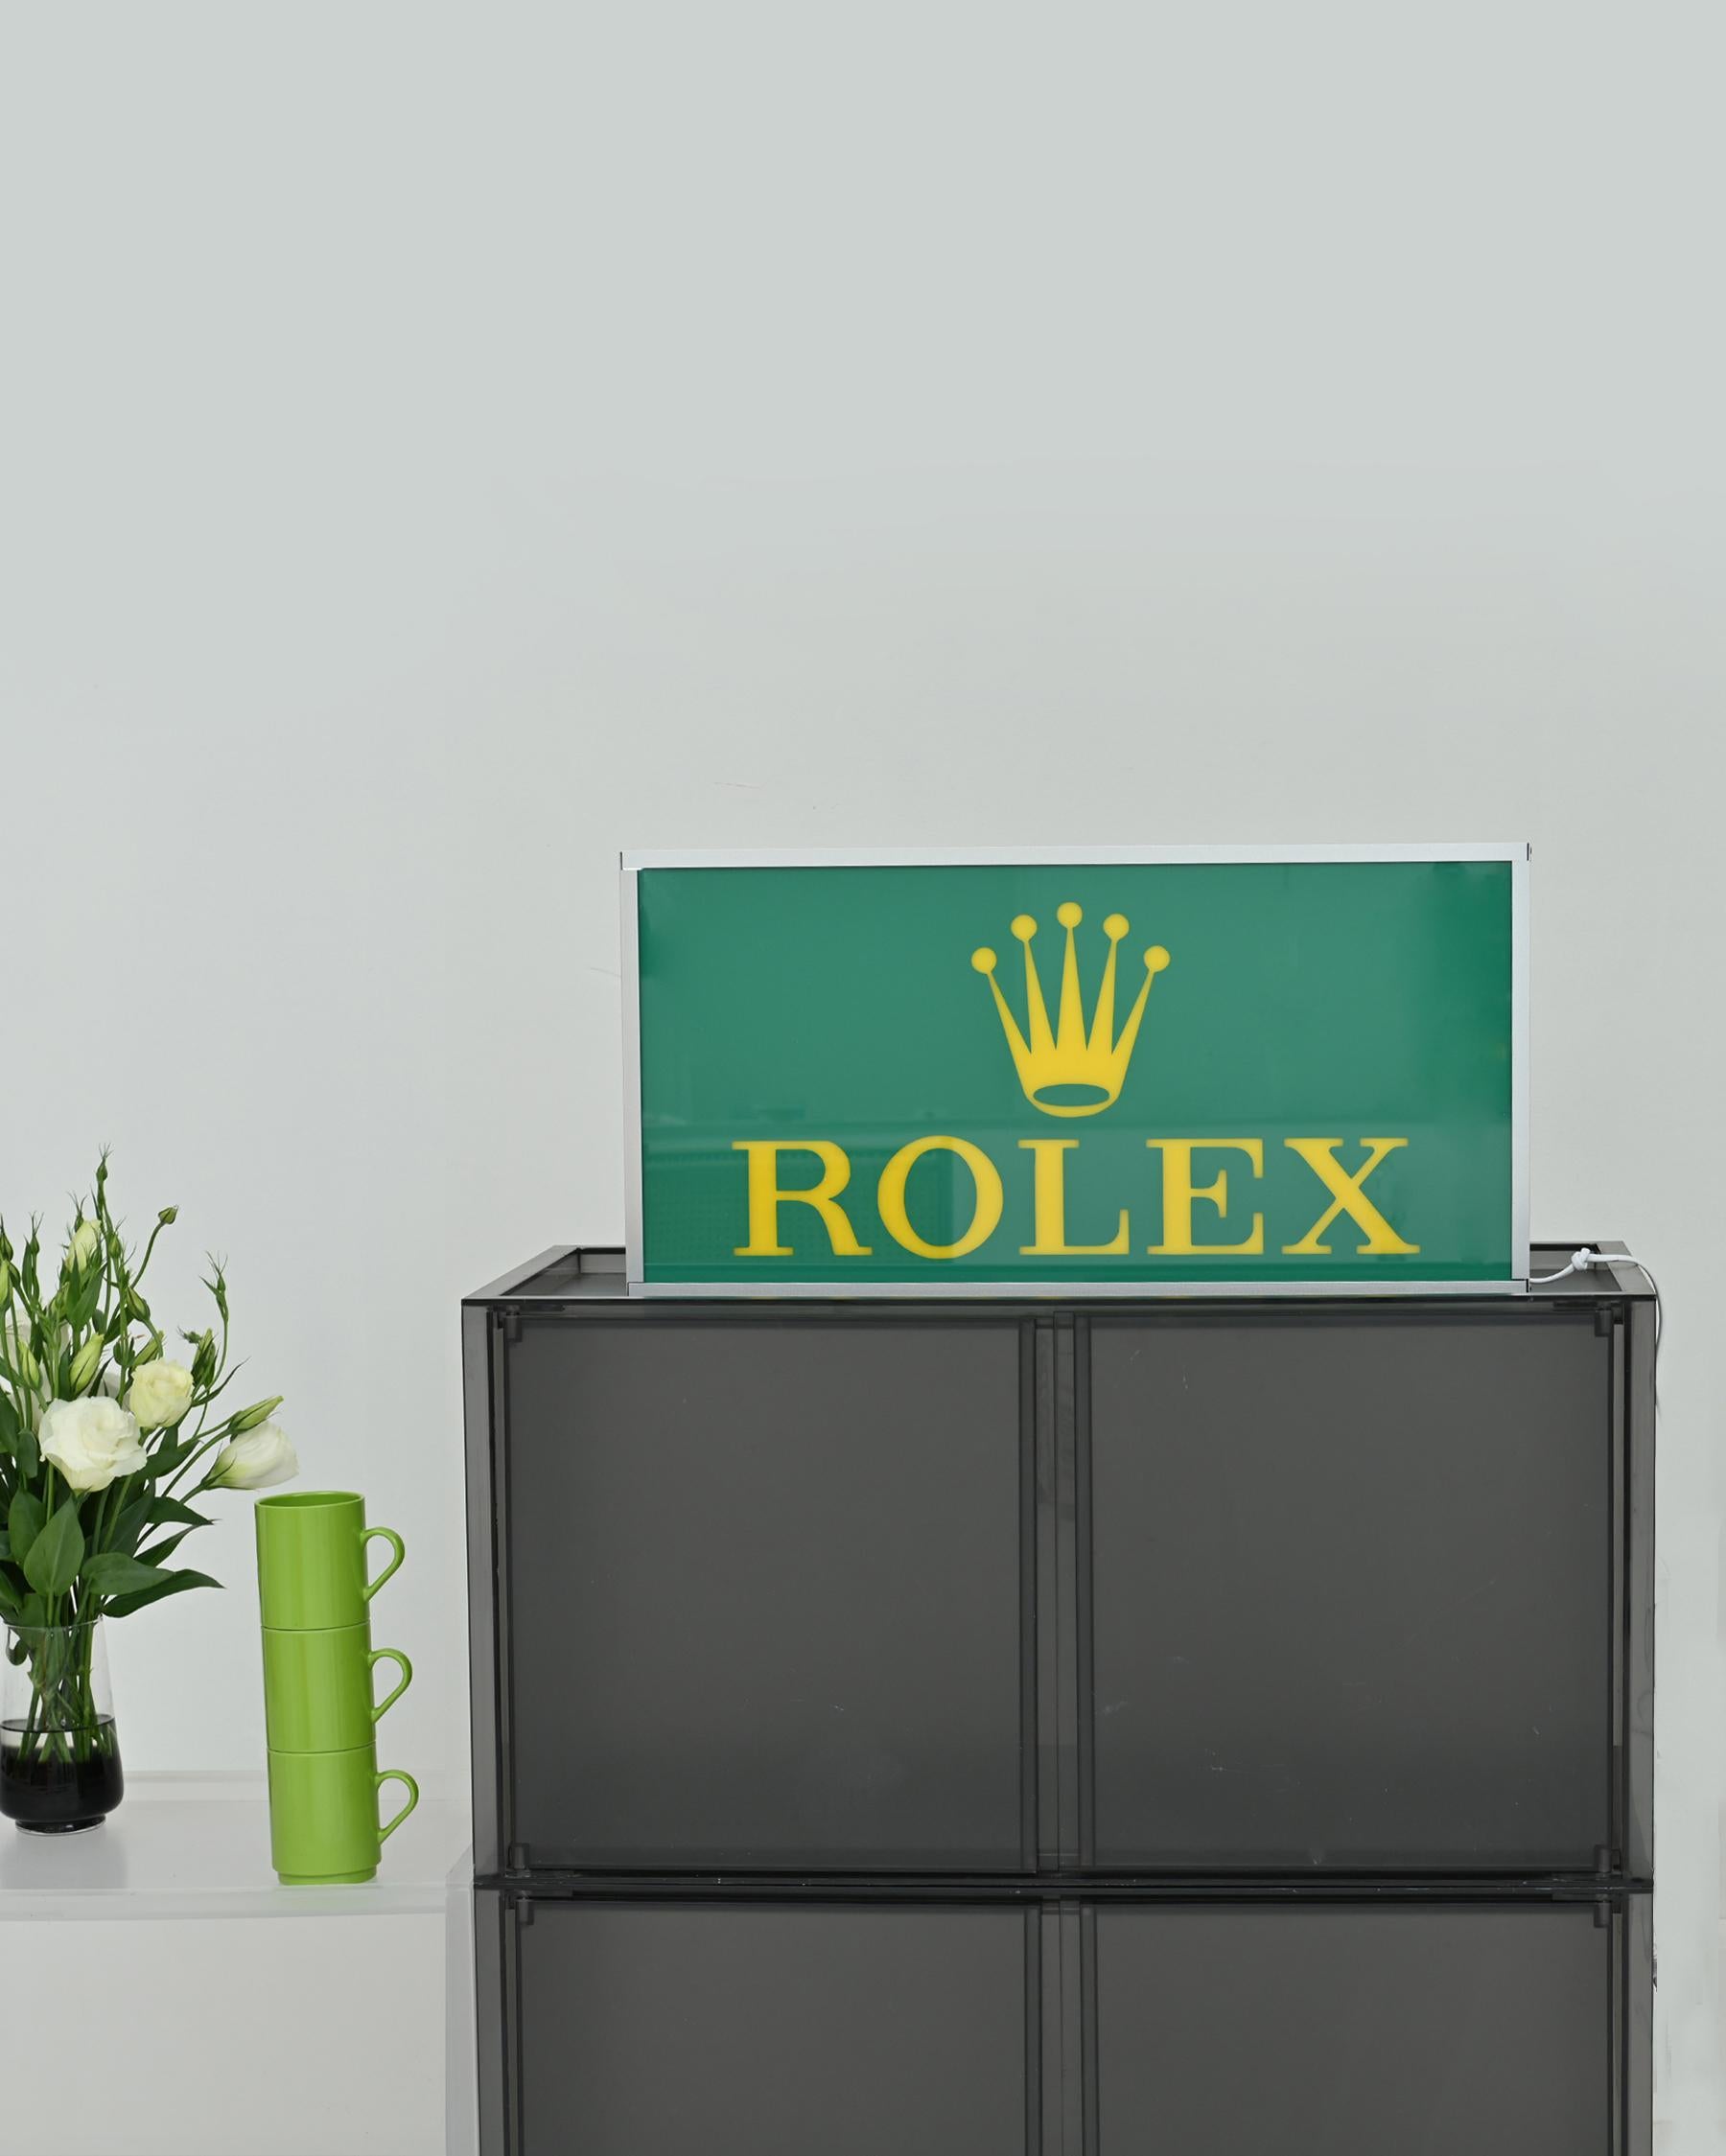 Post-Modern 1990s ROLEX Advertising Signage with Yellow Lighting